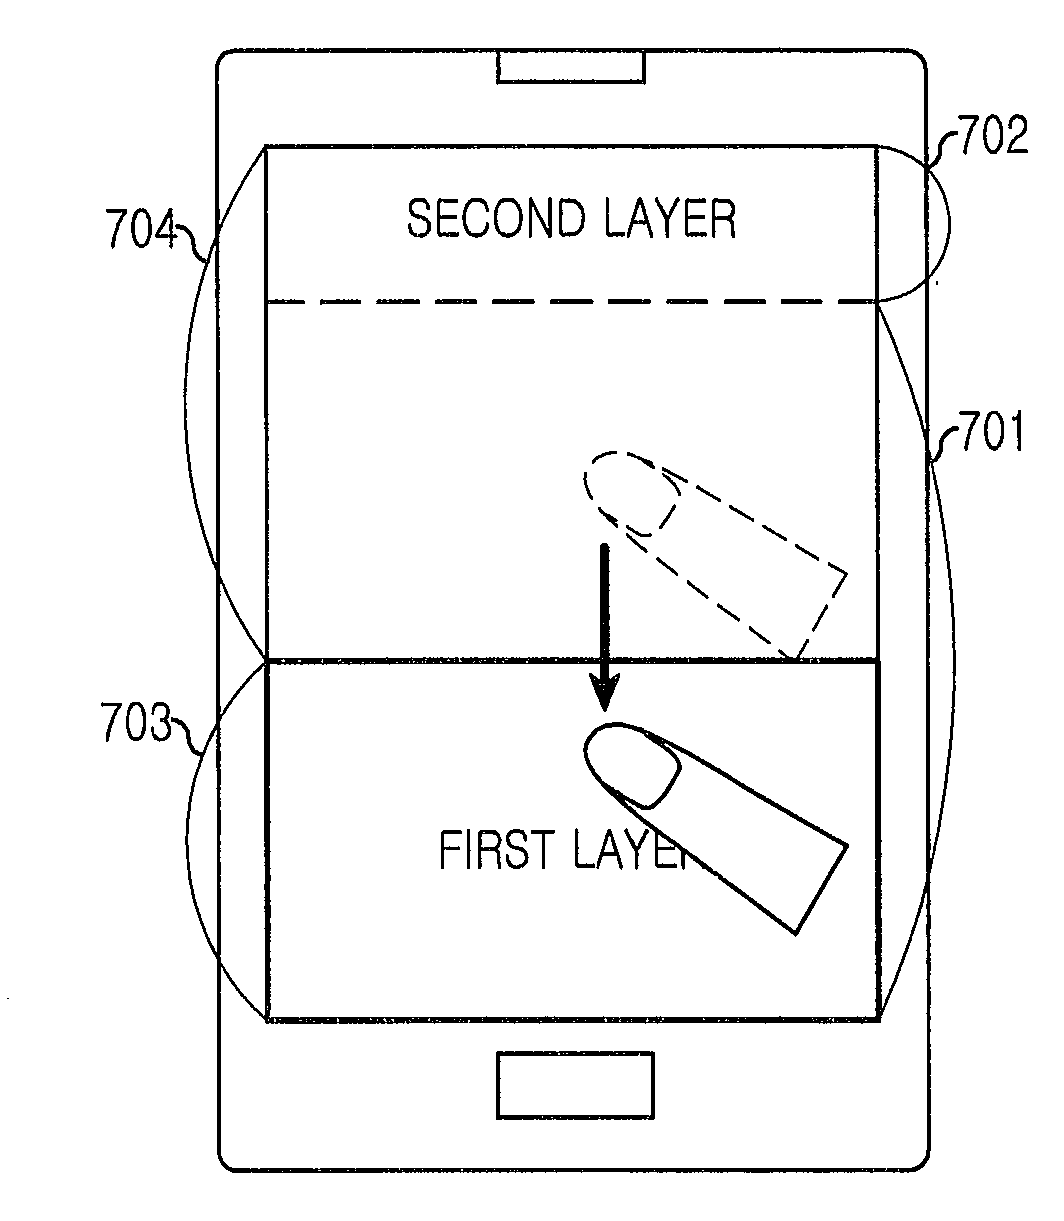 Electronic device and method for displaying application information